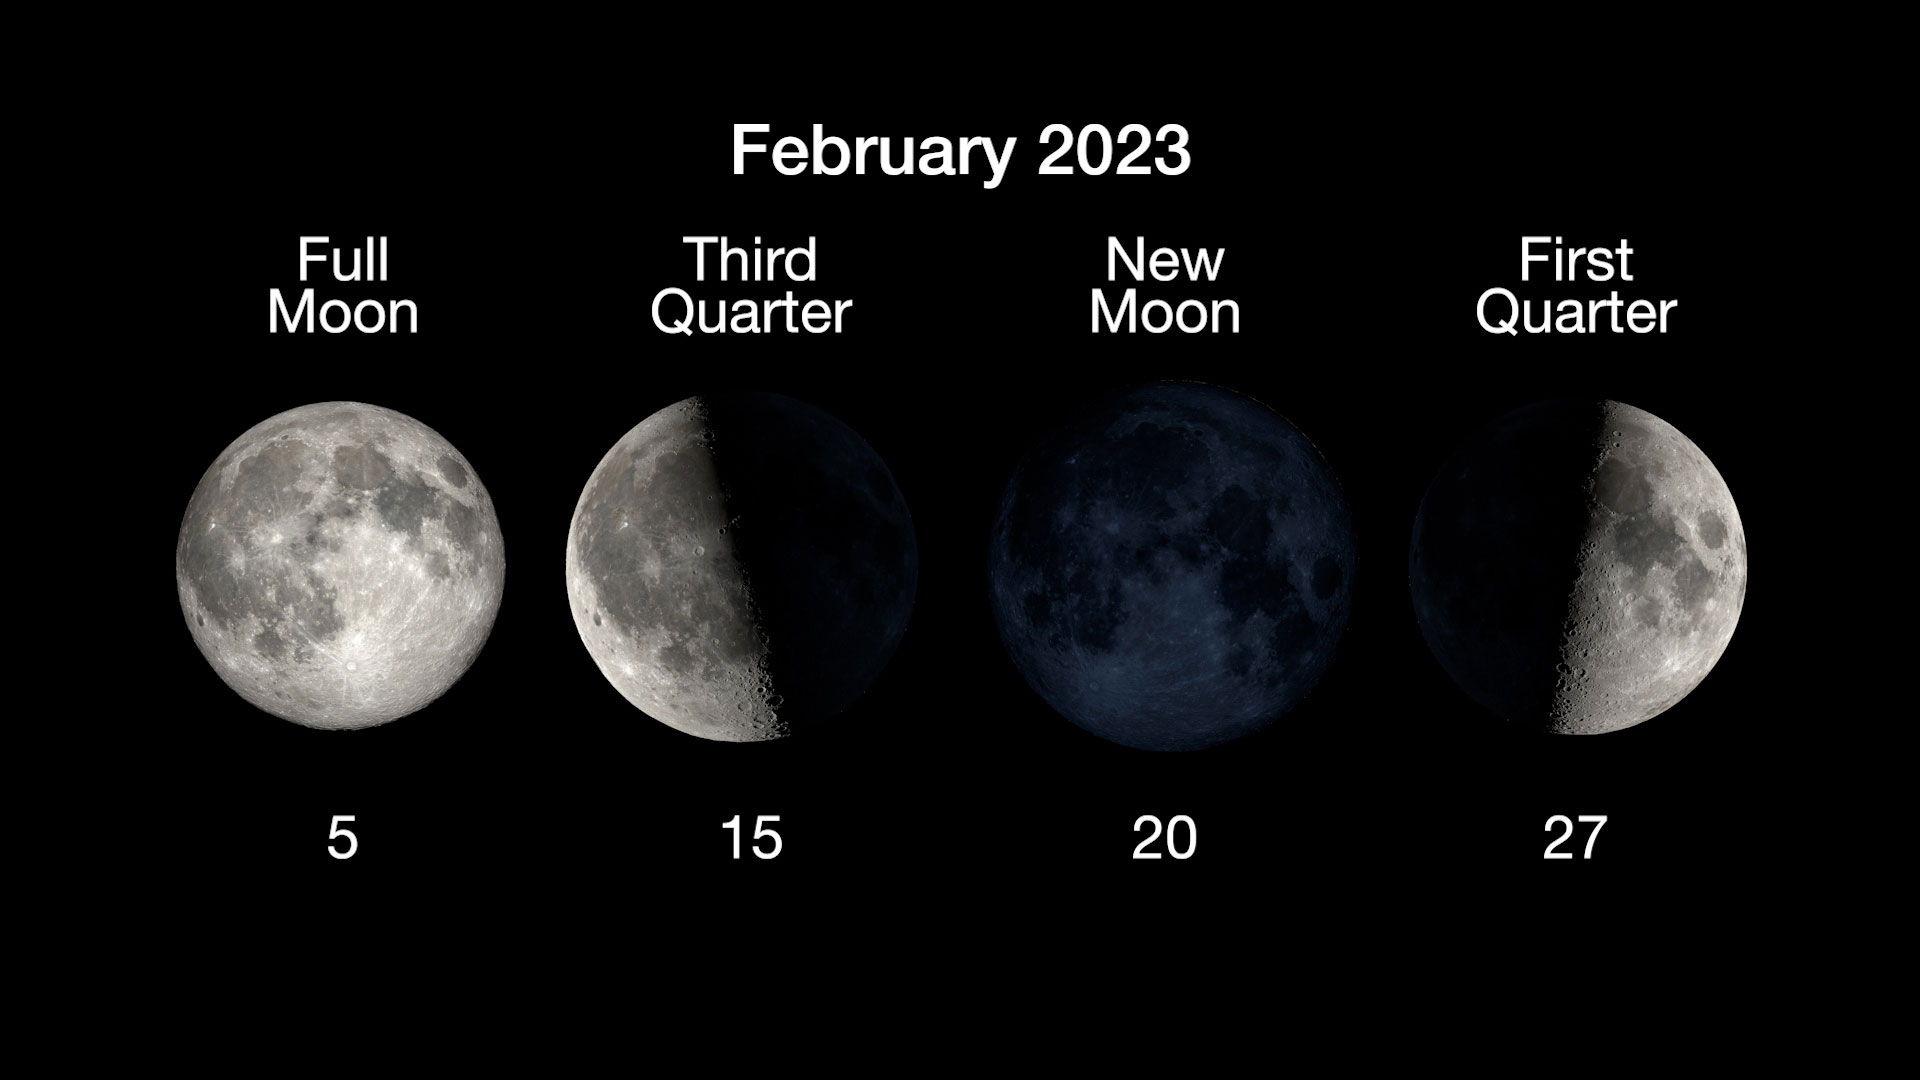 The four main phases of the Moon are illustrated in a horizontal row, with the full moon on February 5, third quarter on February 15, new moon on February 20, and first quarter on February 27.